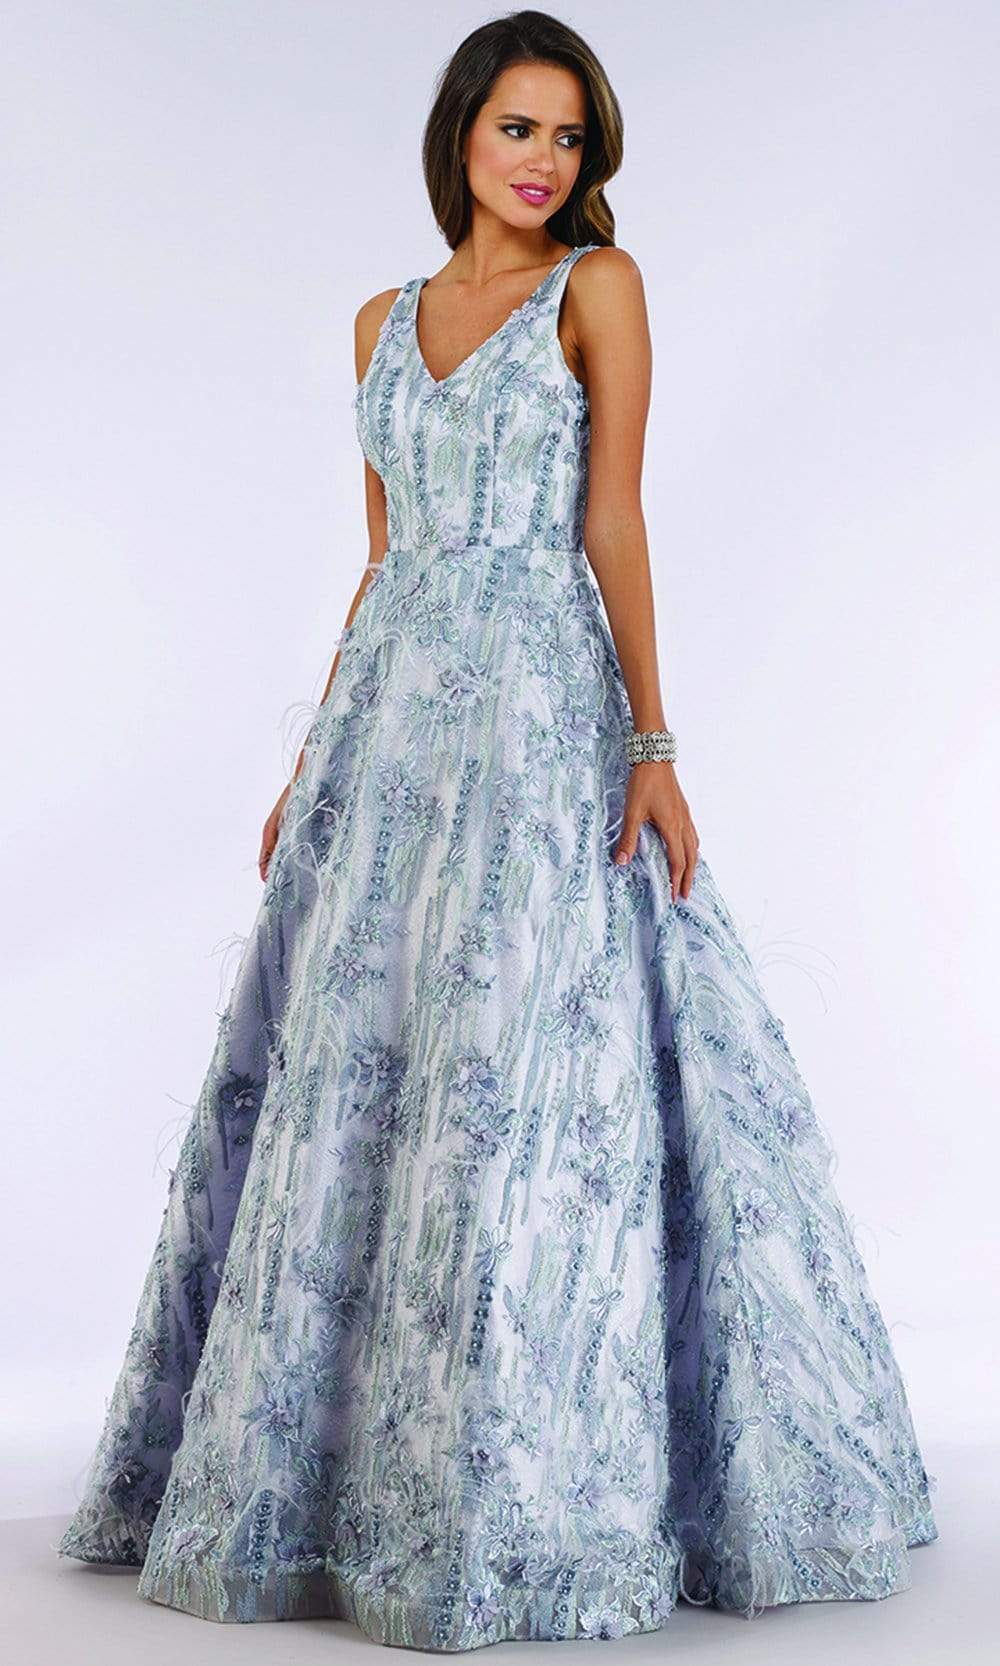 Lara Dresses - 29630 Floral Accent Beaded Feather Adorned Evening Gown Prom Dresses 4 / Lt Blue